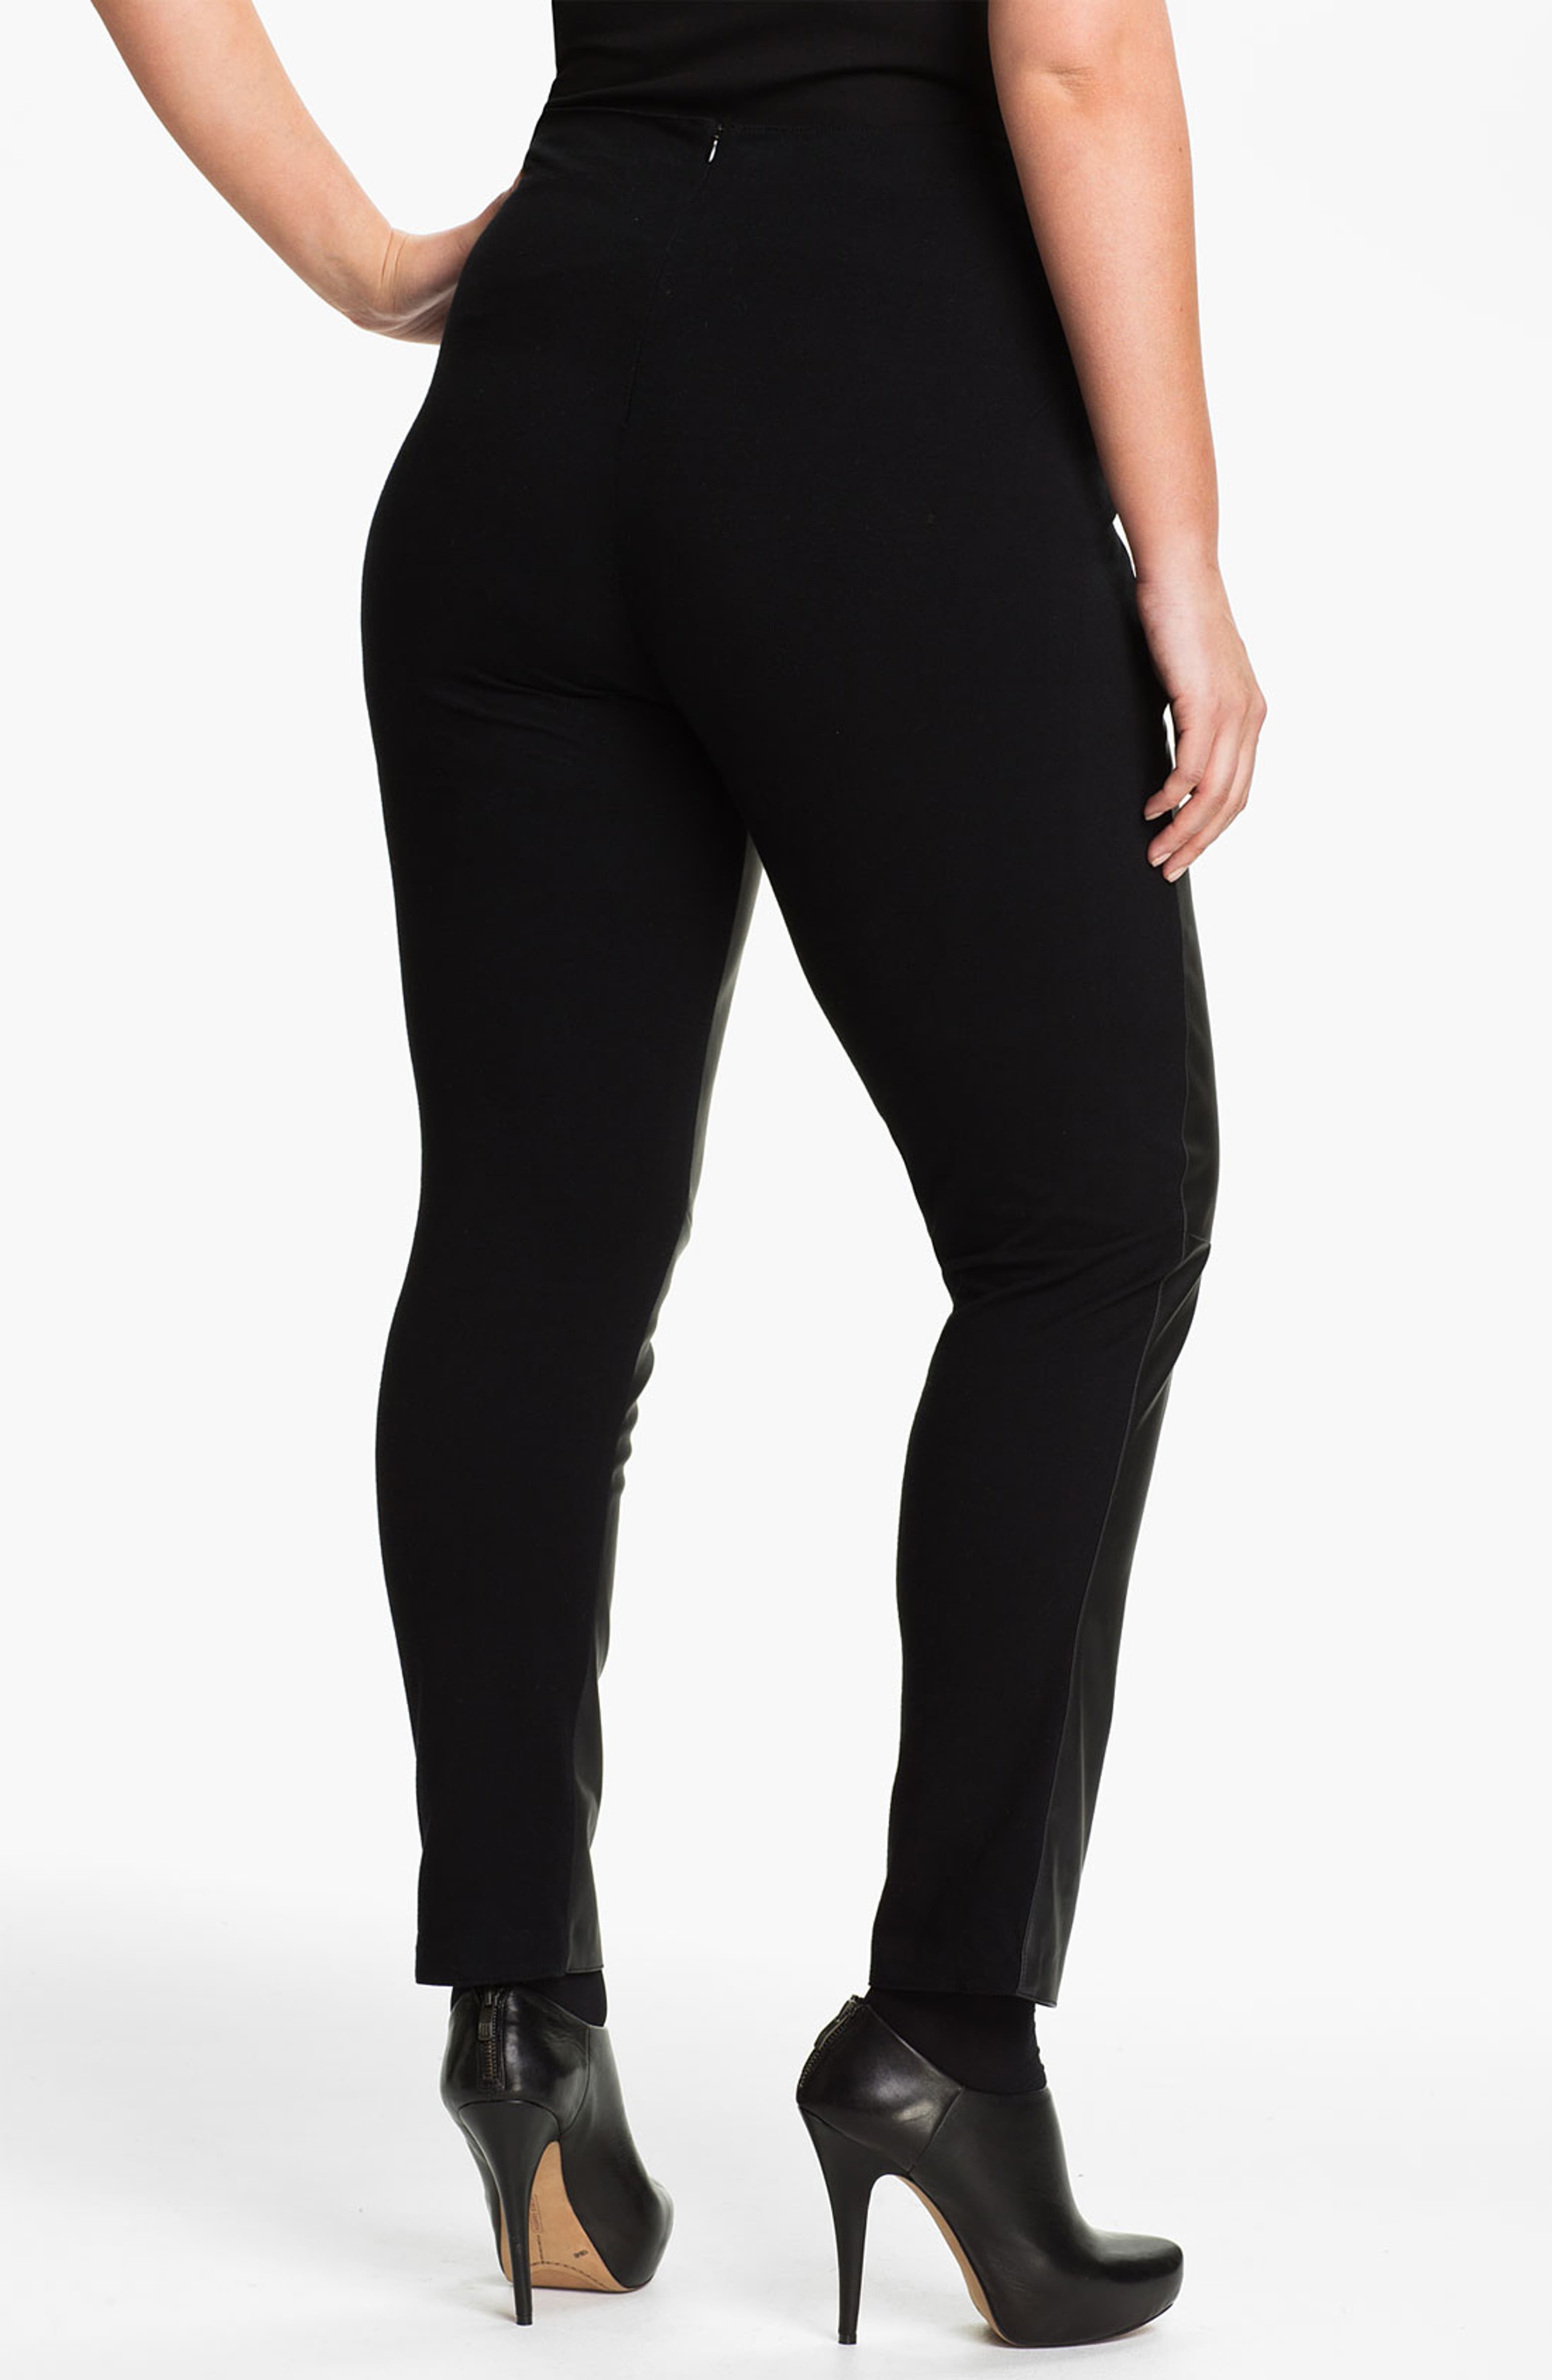 Two by Vince Camuto Leggings & Vince Camuto Colorblock Top | Nordstrom